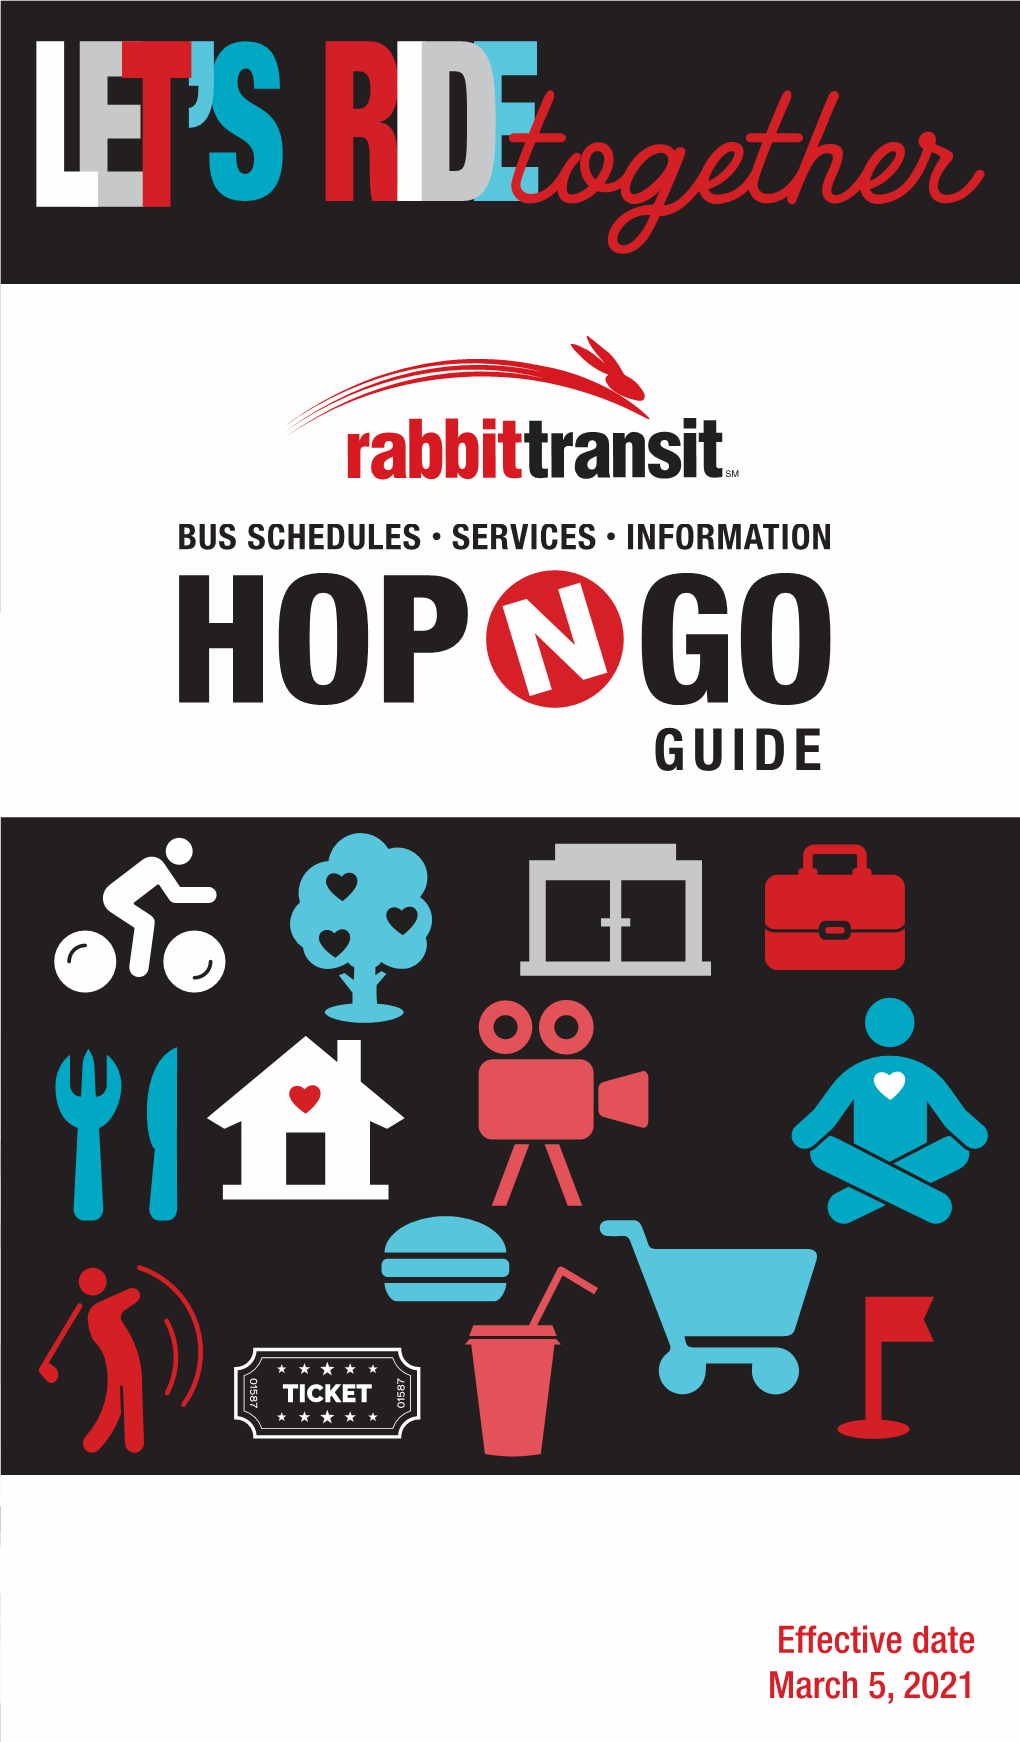 Hopngo Guide for York Scheduled Routes